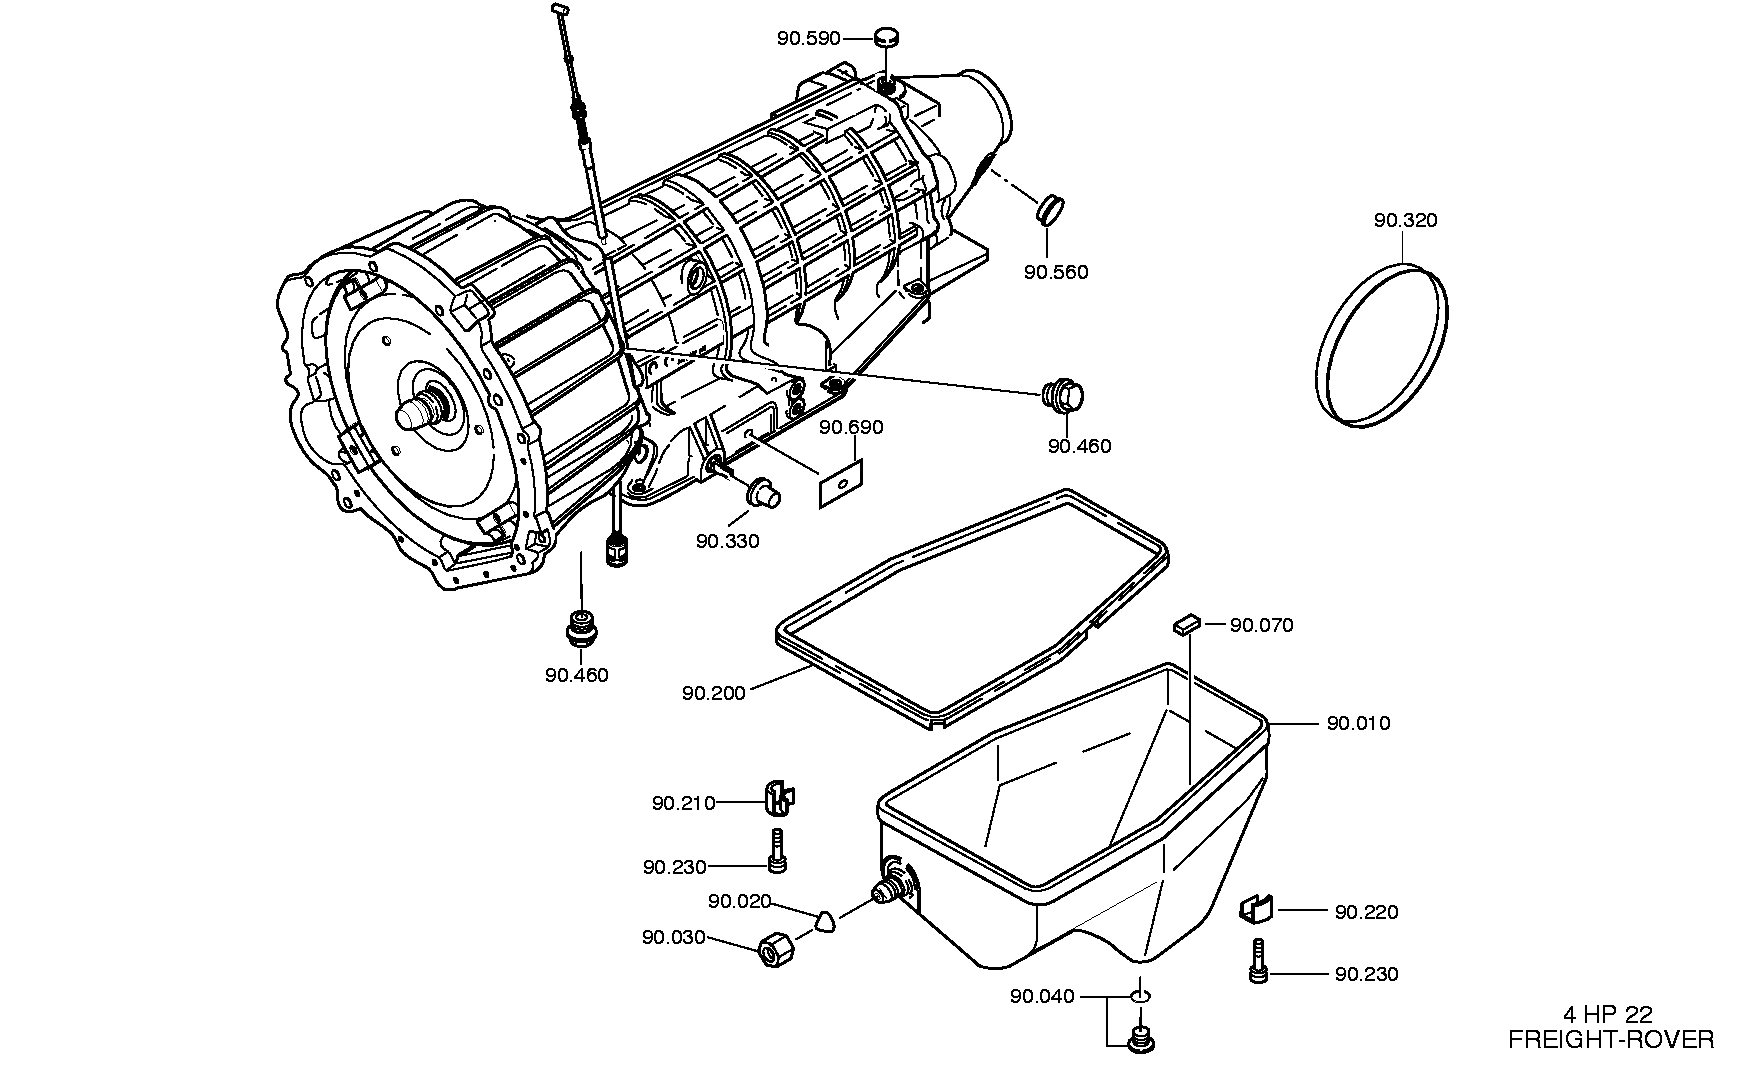 drawing for UNIPART 02JLM 1869 - PLUG (figure 2)